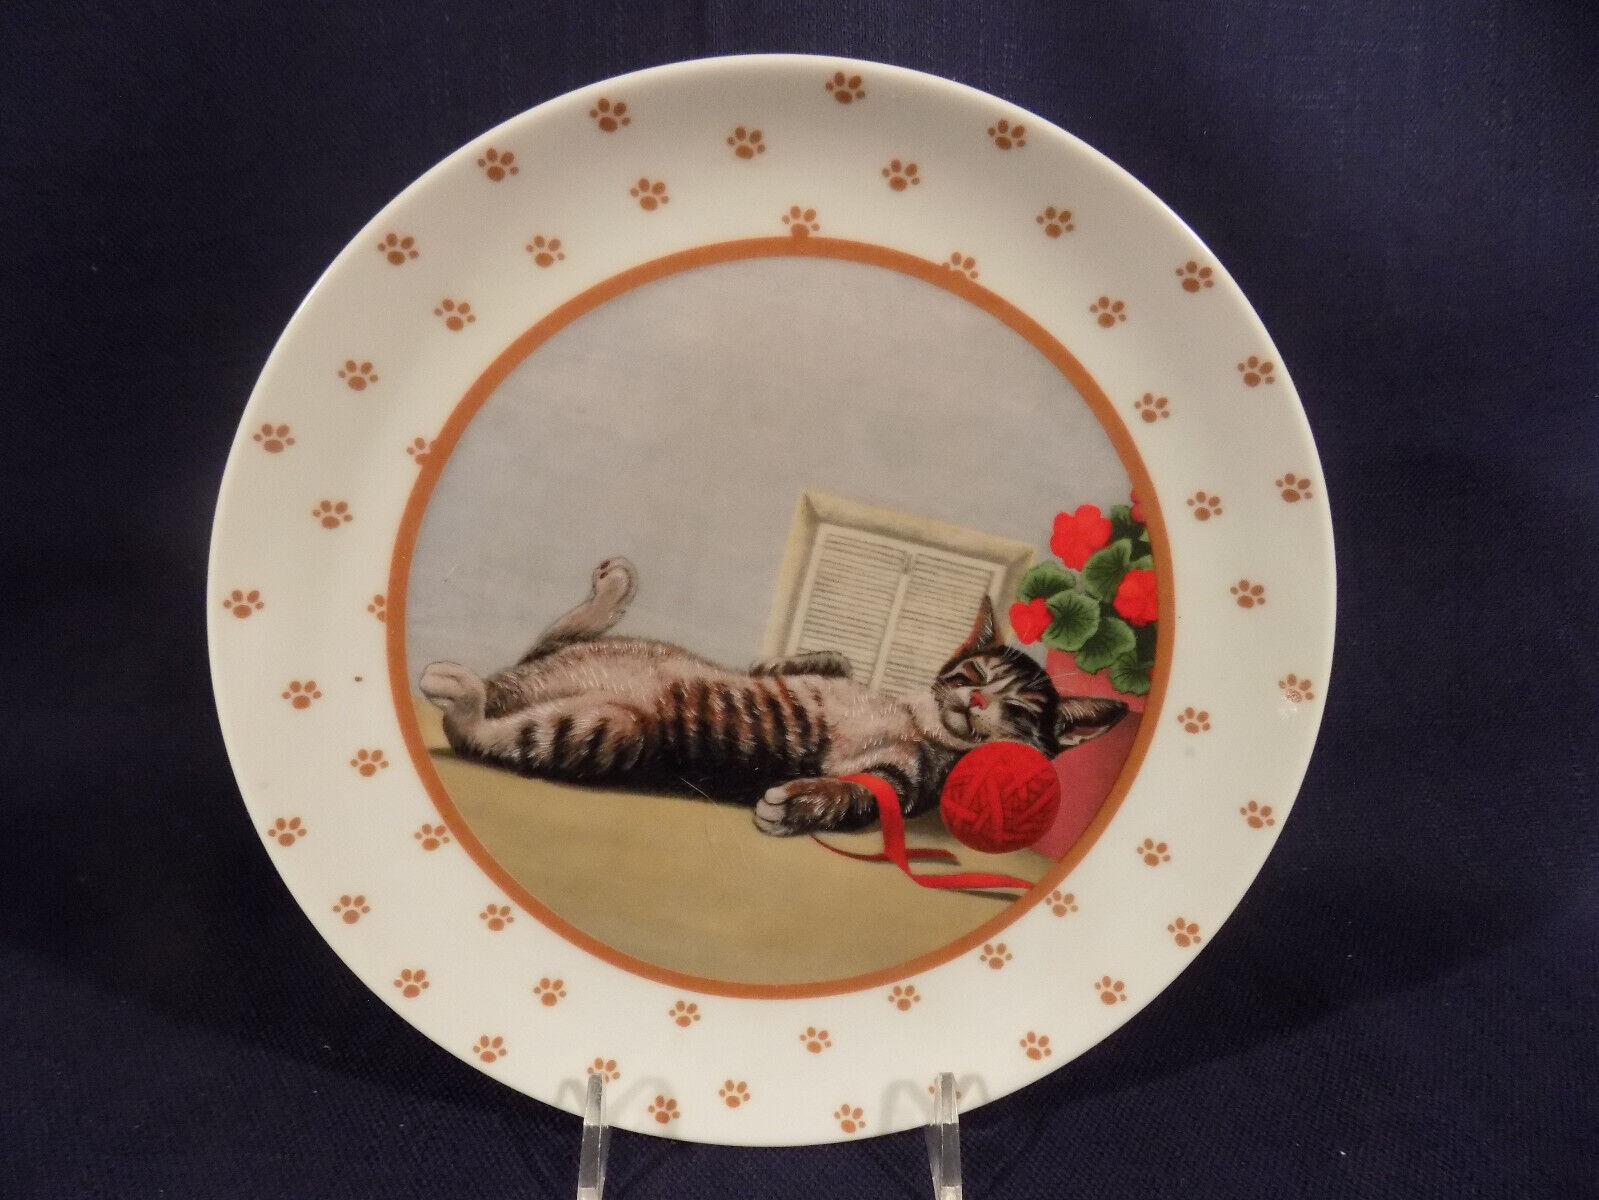 VINTAGE 1986 LOWELL HERRERO SLEEPING CAT WITH BALL OF YARN PLATE - EXCELLENT